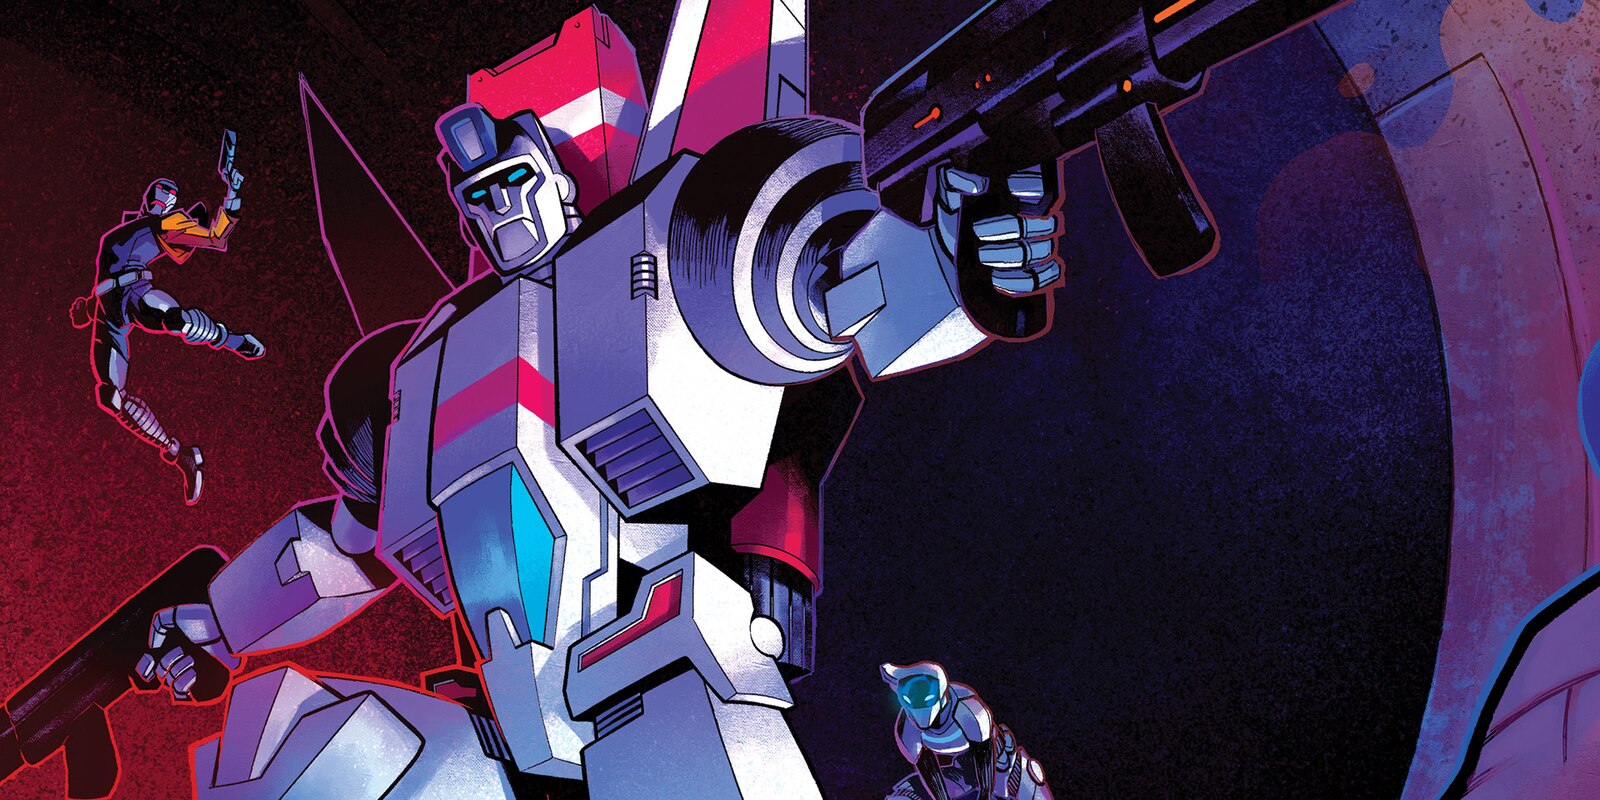 Jetfire, Skuxxoid, Quintesson Prosecutor Transformers Comic Covers from Void Rivals Reprints